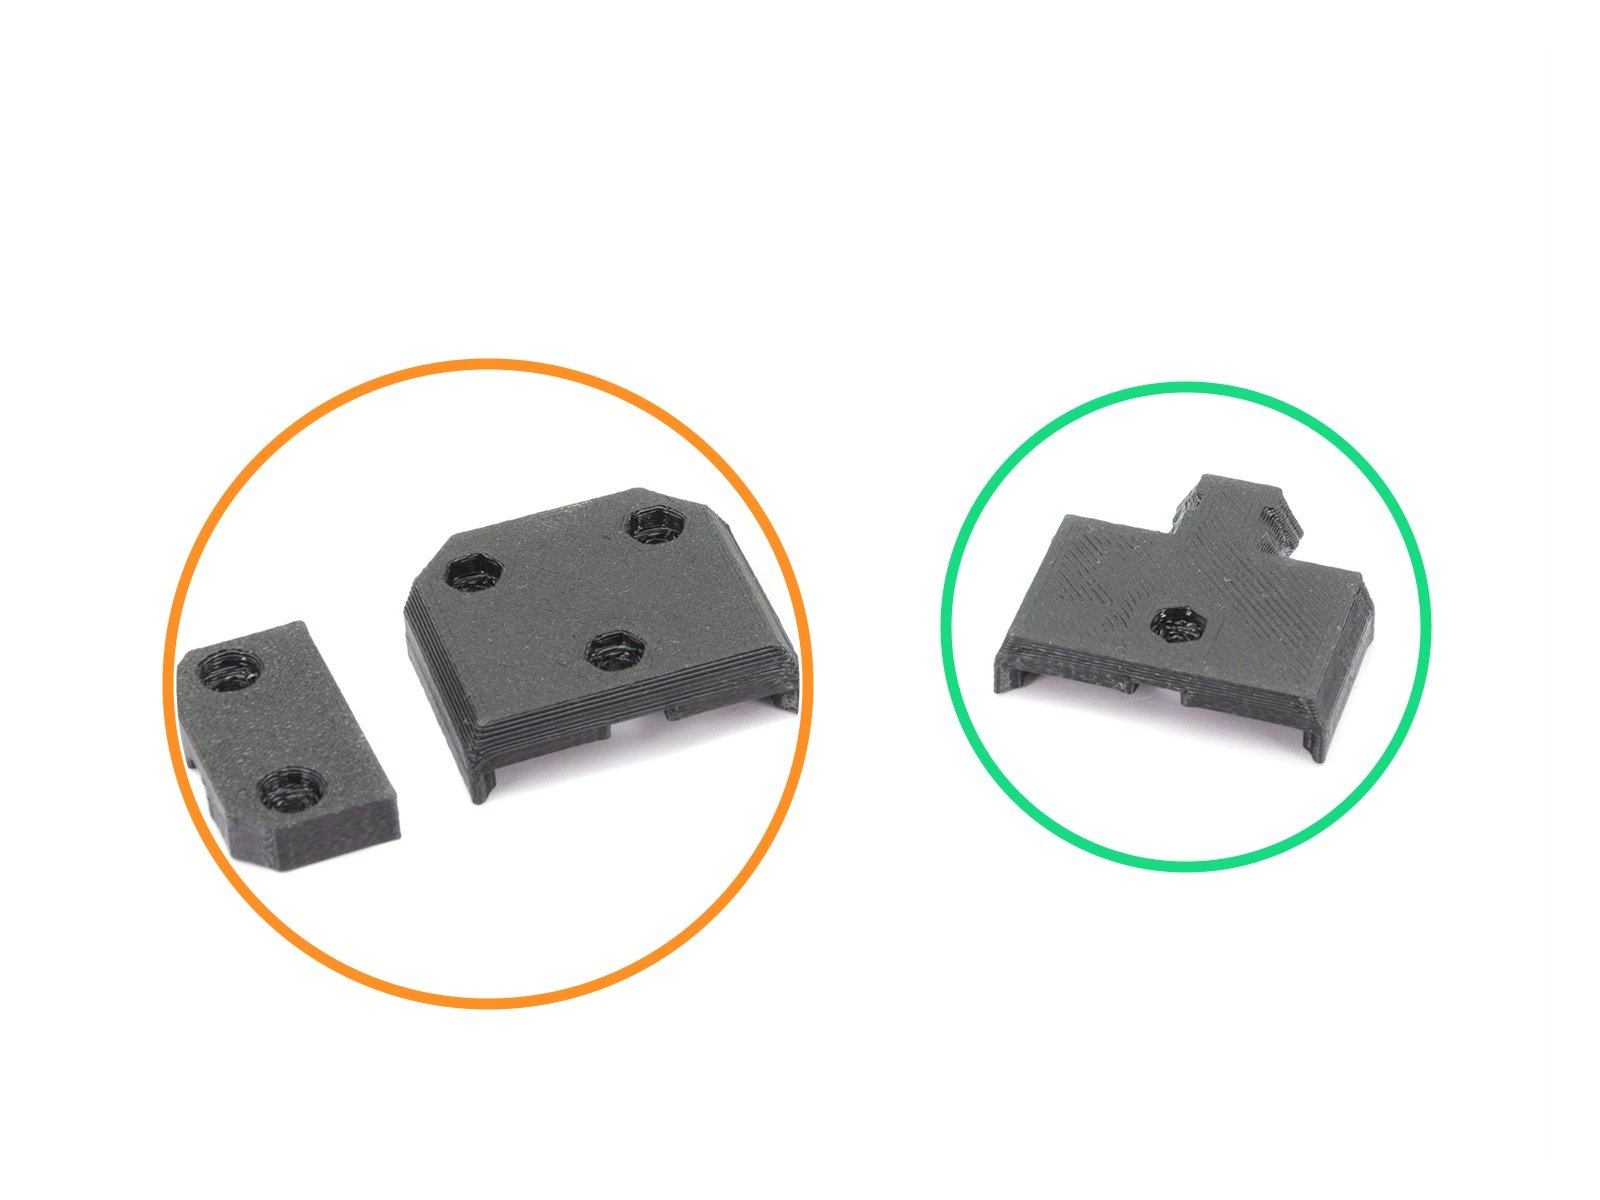 Different heatbed cable covers